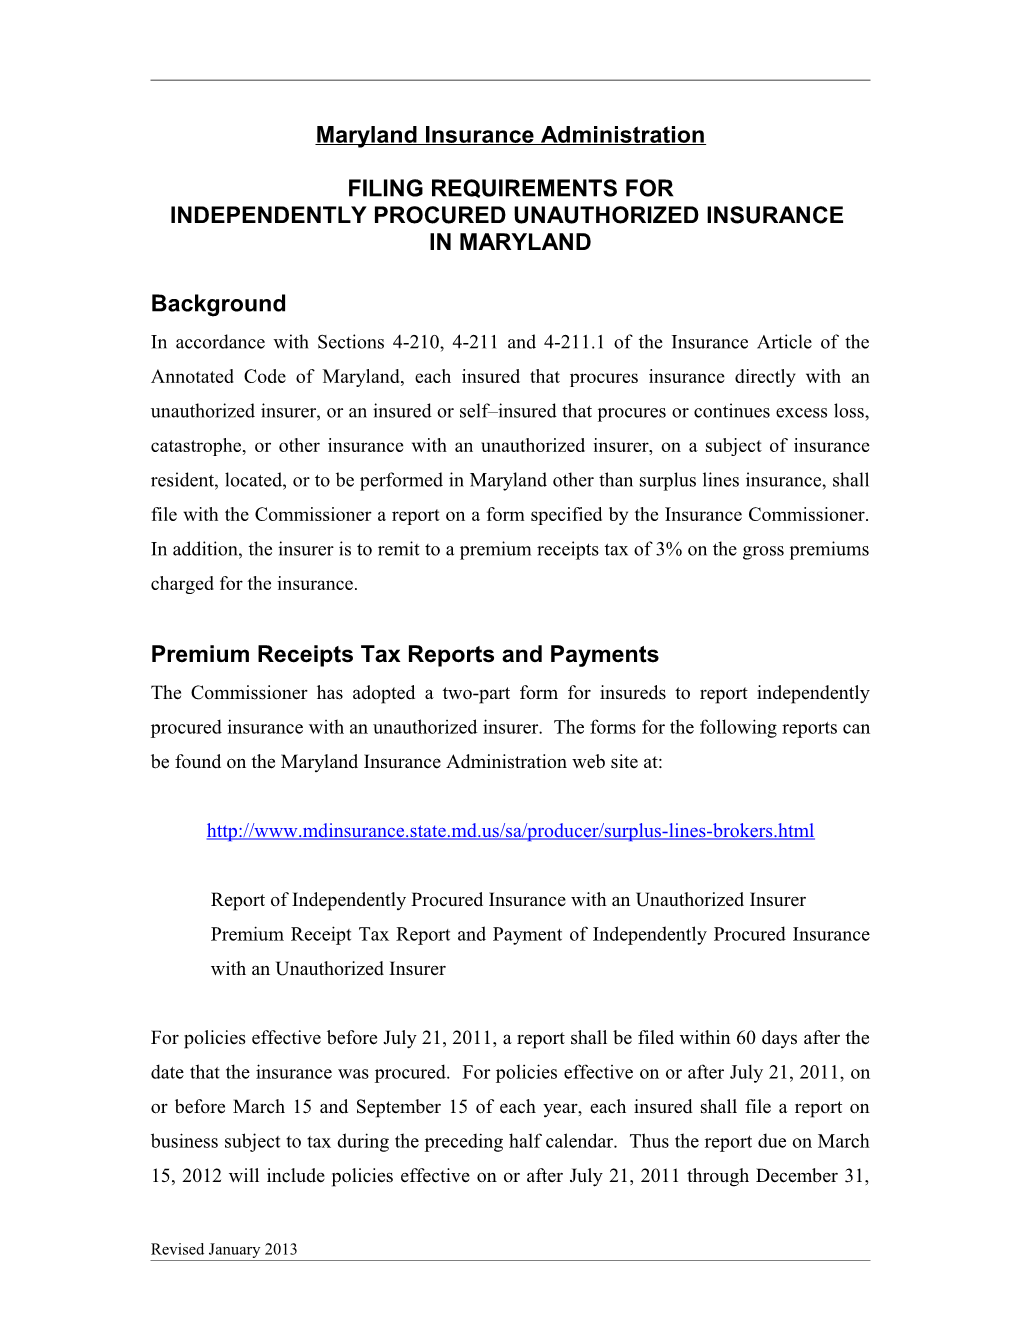 Website Filing Instructions for Nonadmitted Insurance Reports and Tax Payment (00062244)